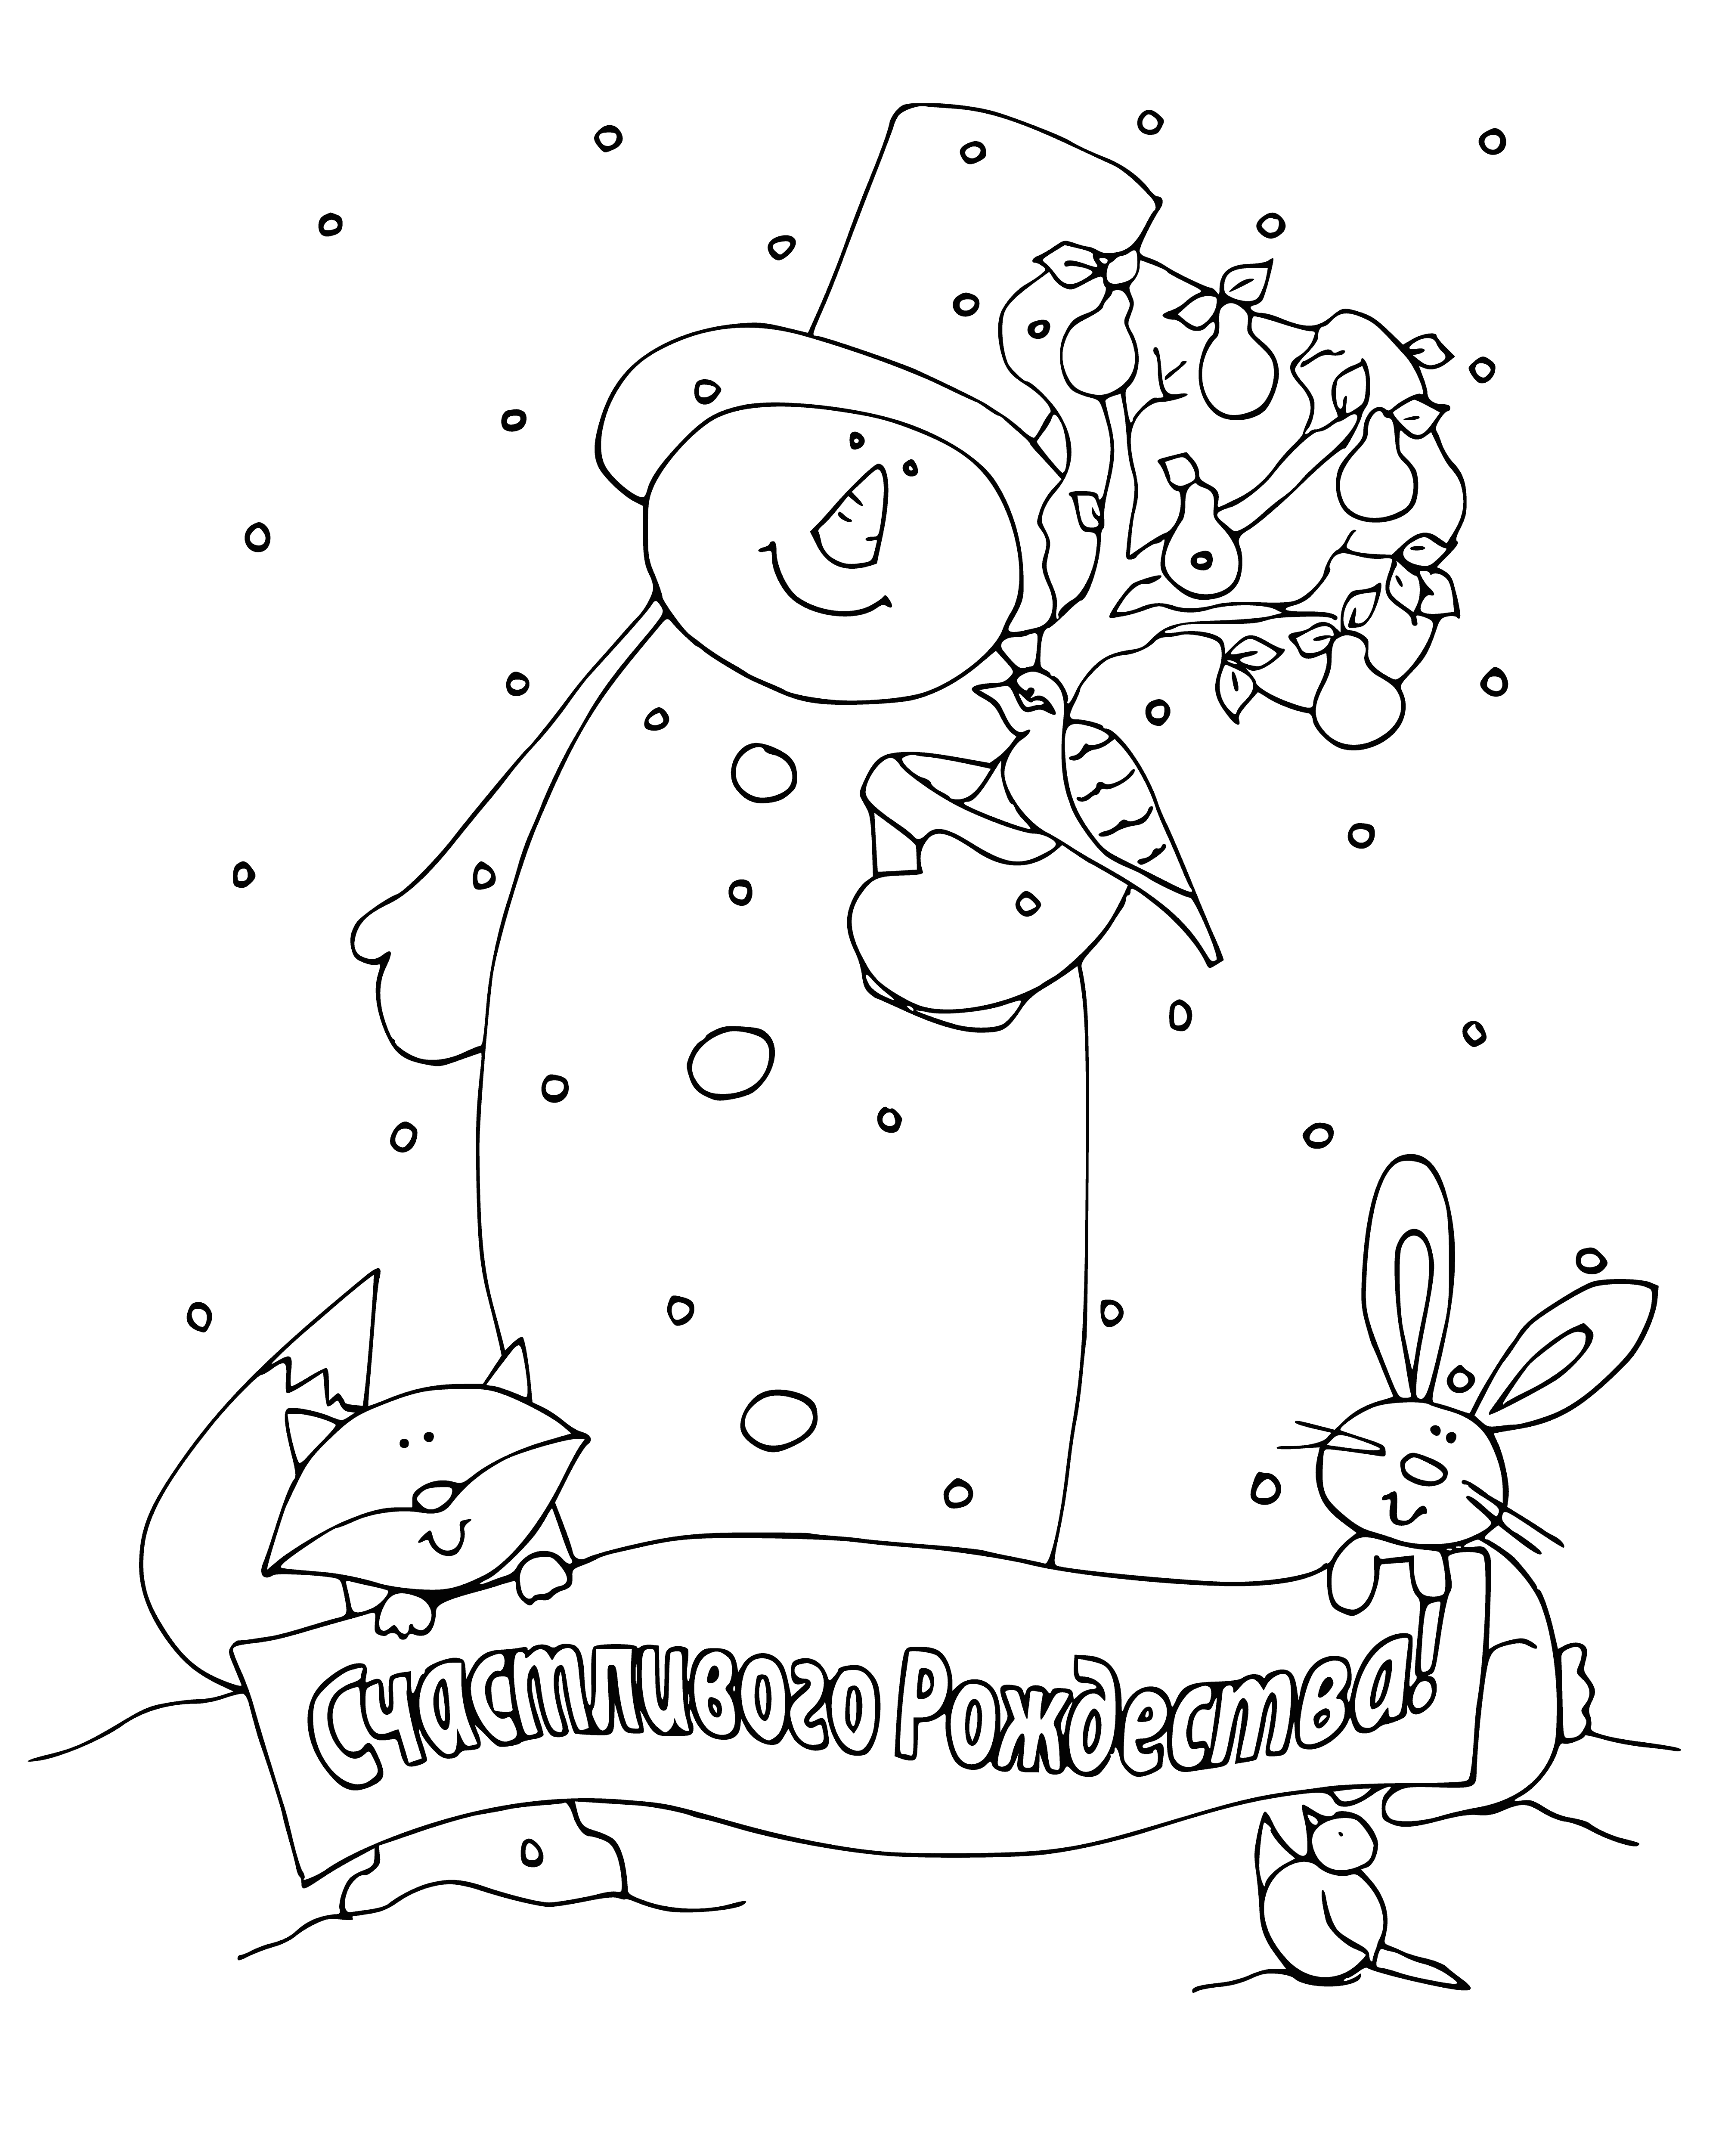 coloring page: Two snowmen in coloring page: white, carrot nose, black eyes, hat. One holding sign: "Merry Christmas." #Christmas #Coloring #Snowman